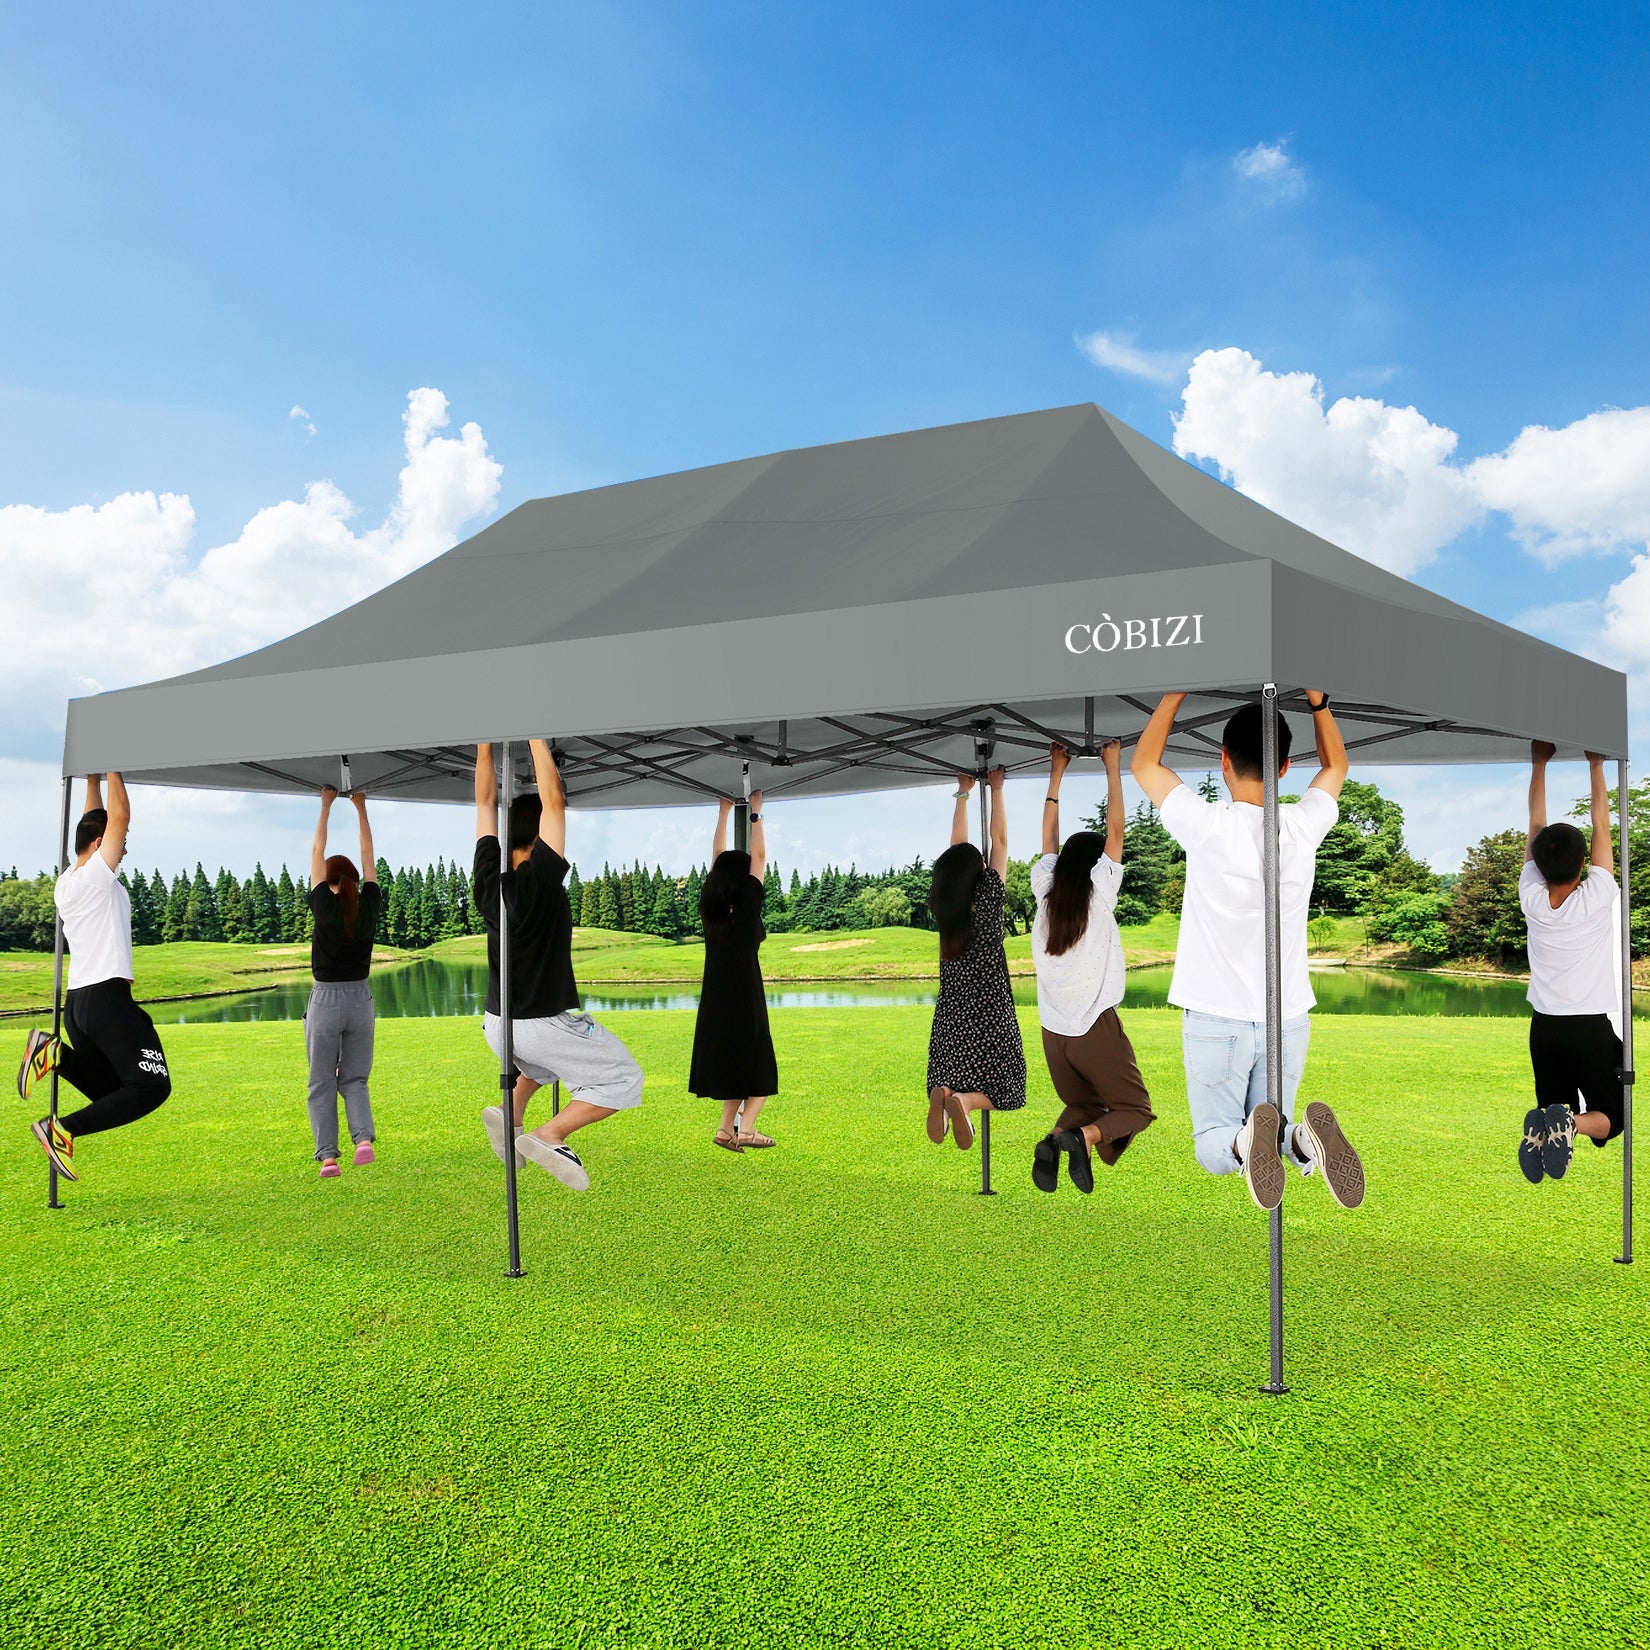 10'x20' Pop Up Canopy Waterproof Folding Tent Outdoor Easy Set-up Instant Tent Heavy Duty Commercial Wedding Party Shelter with 6 Removable Sidewalls, 6 Sandbags, Roller Bag, Gray